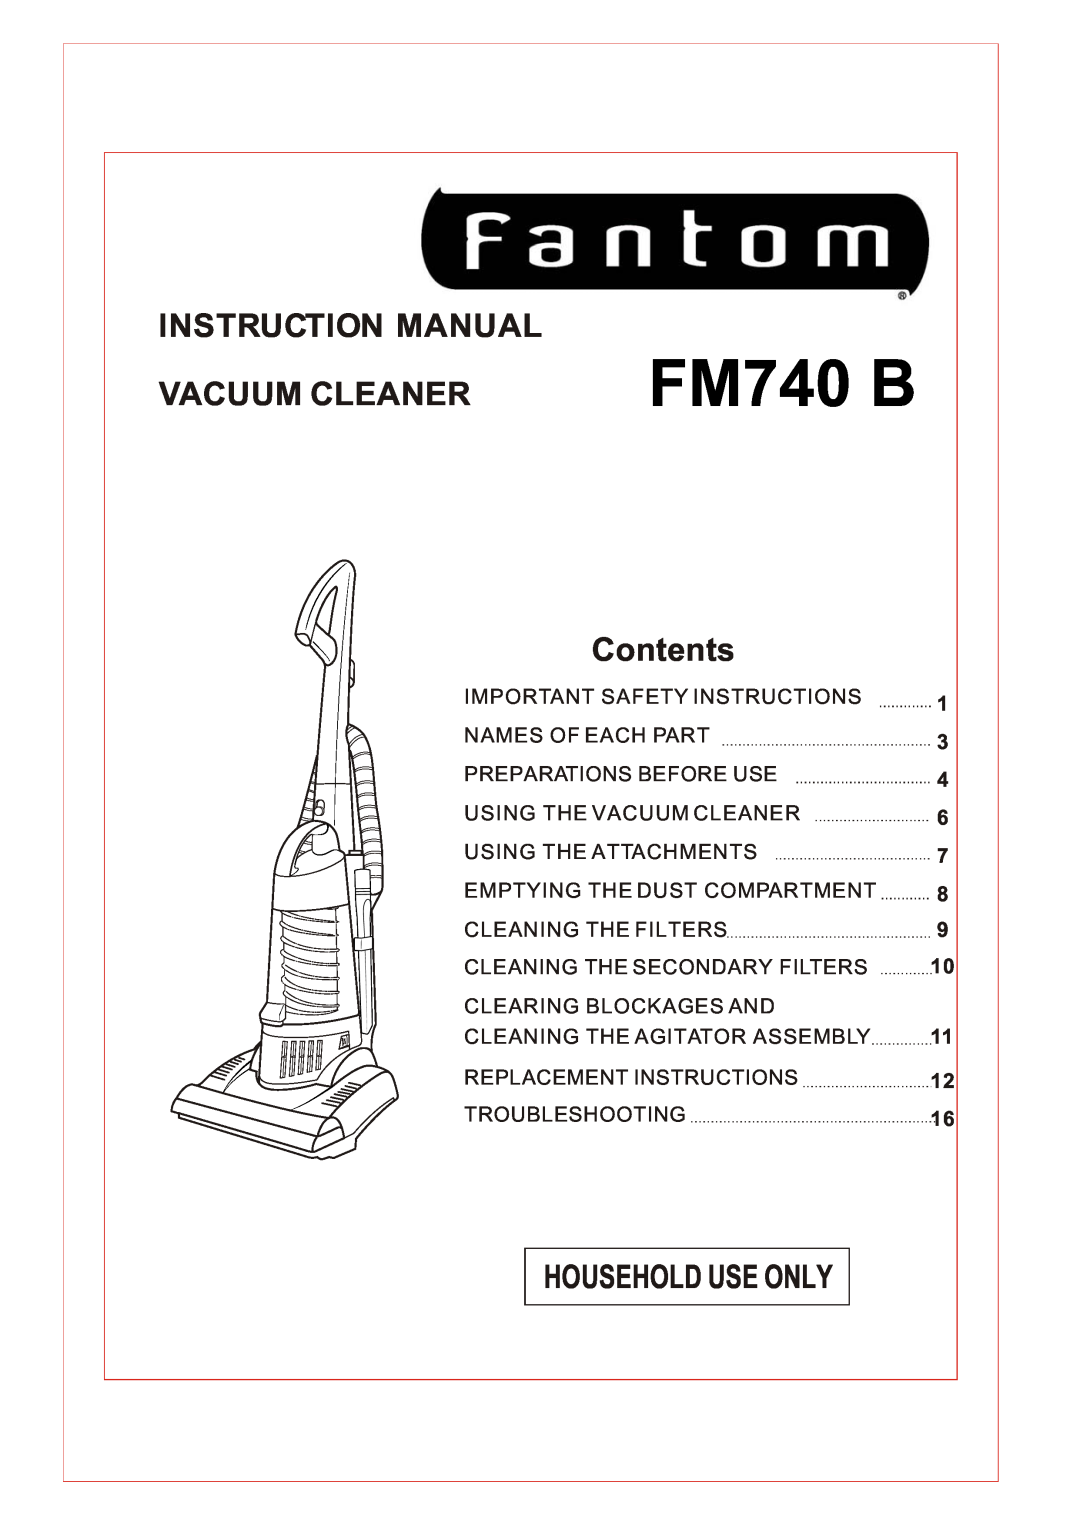 Fantom Vacuum FM740 B instruction manual Vacuum Cleaner, Contents, Household Use Only, 1 3 4 6 7 8 